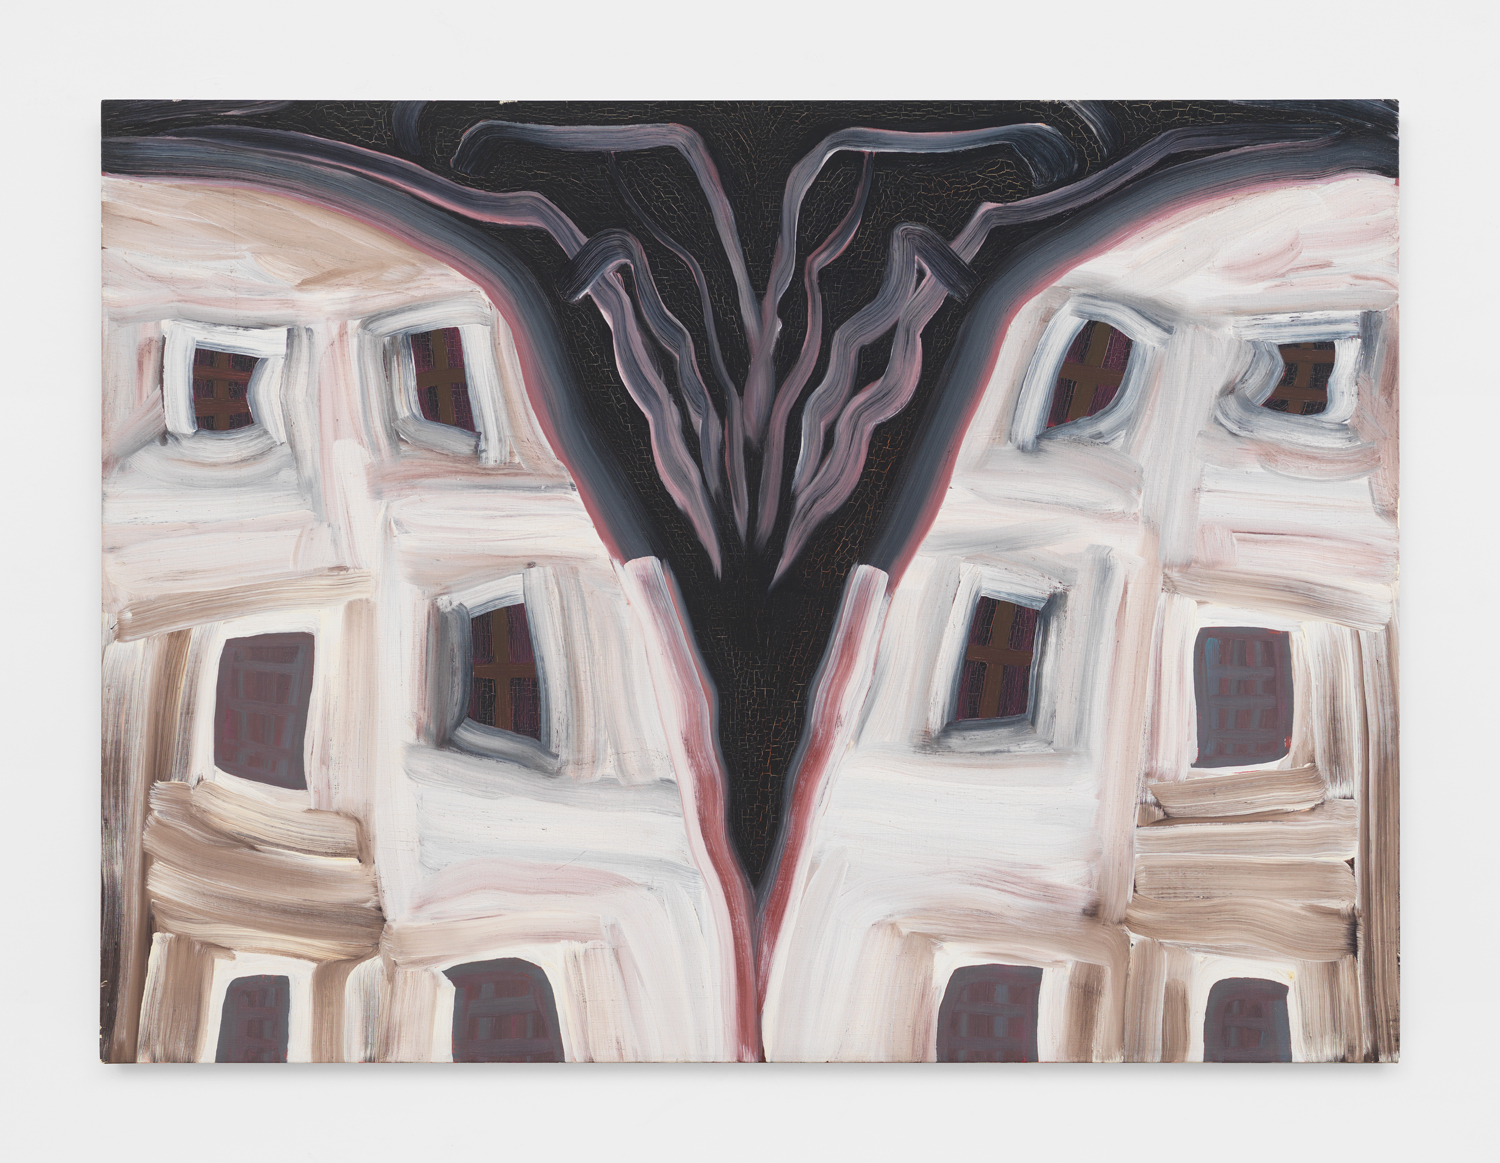 On view in at 95 Orchard Street: Martha Diamond, Flame, 1980, Oil on linen, 40.25h x 54w in.